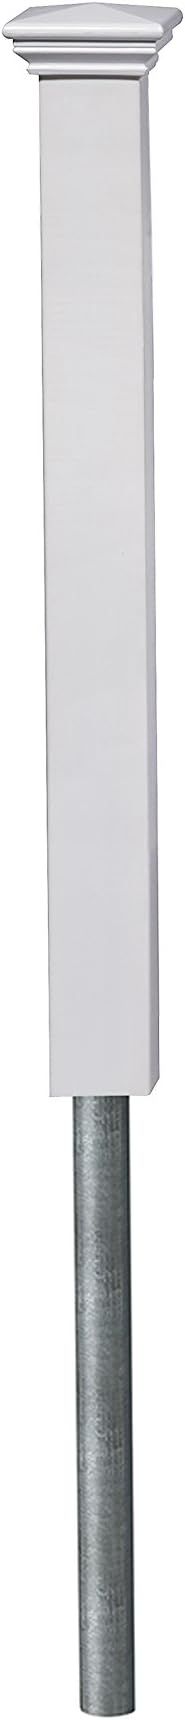 Zippity Outdoor Products ZP19003 Newport Finishing No Dig Vinyl Post, 3' Tall, White | Amazon (US)